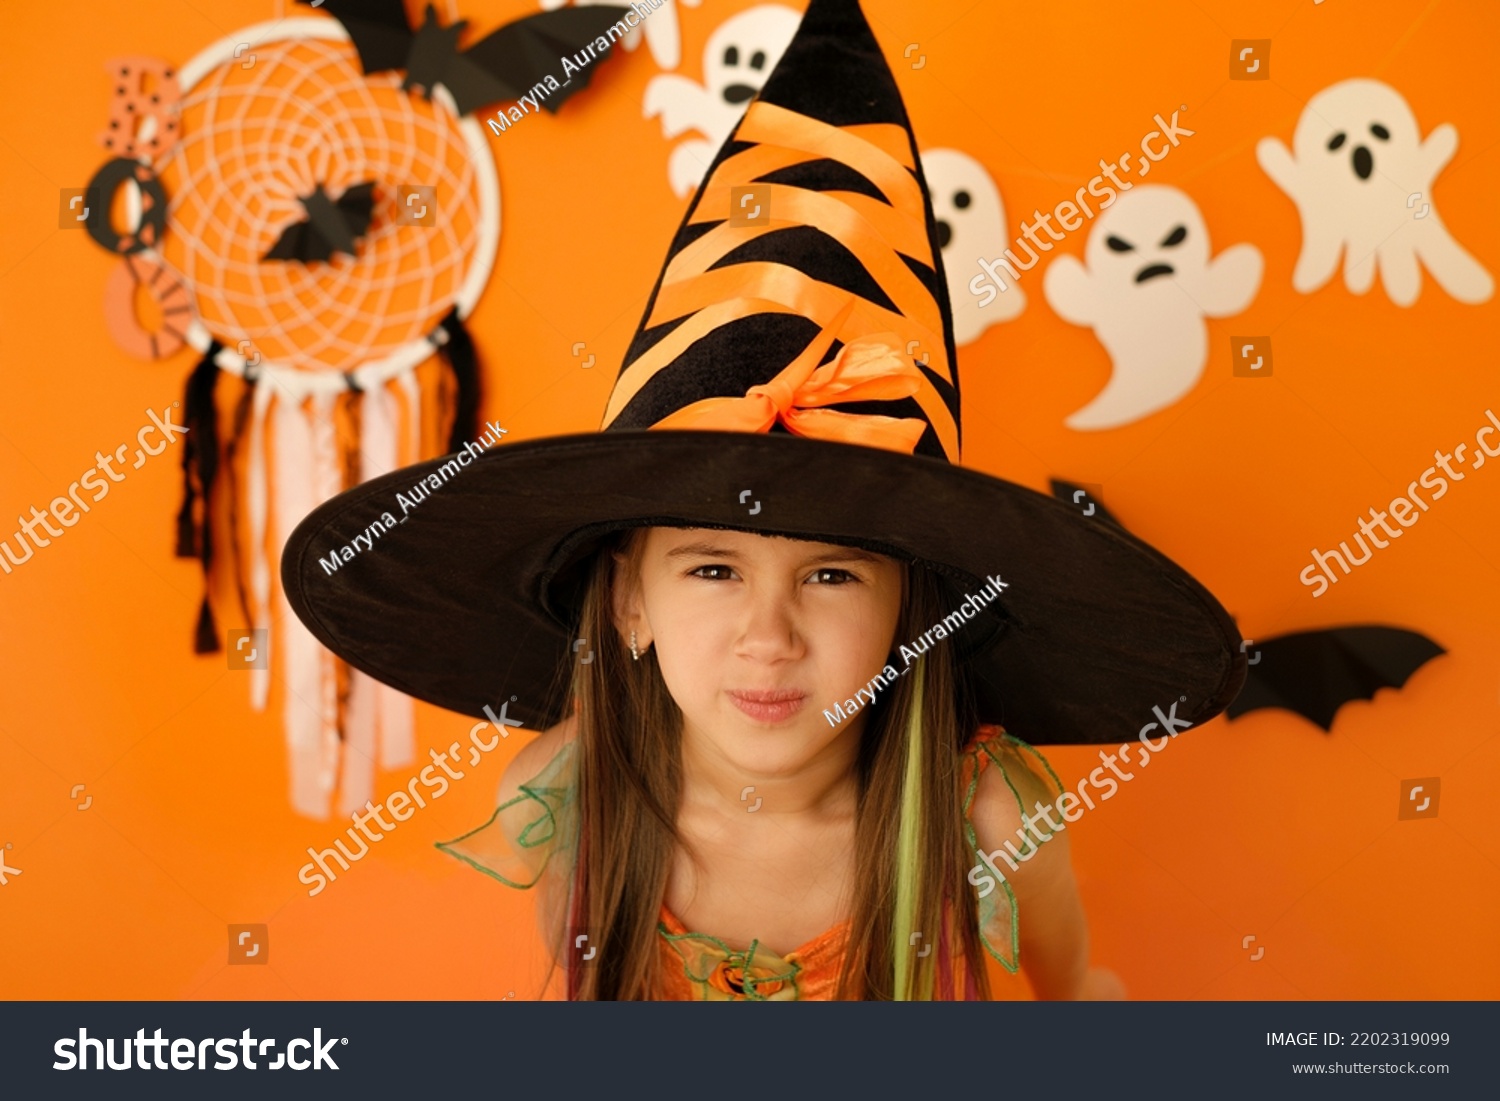 An angry dissatisfied girl in the guise of a witch looks into the camera making a face. Halloween decor with ghosts on an orange studio background #2202319099